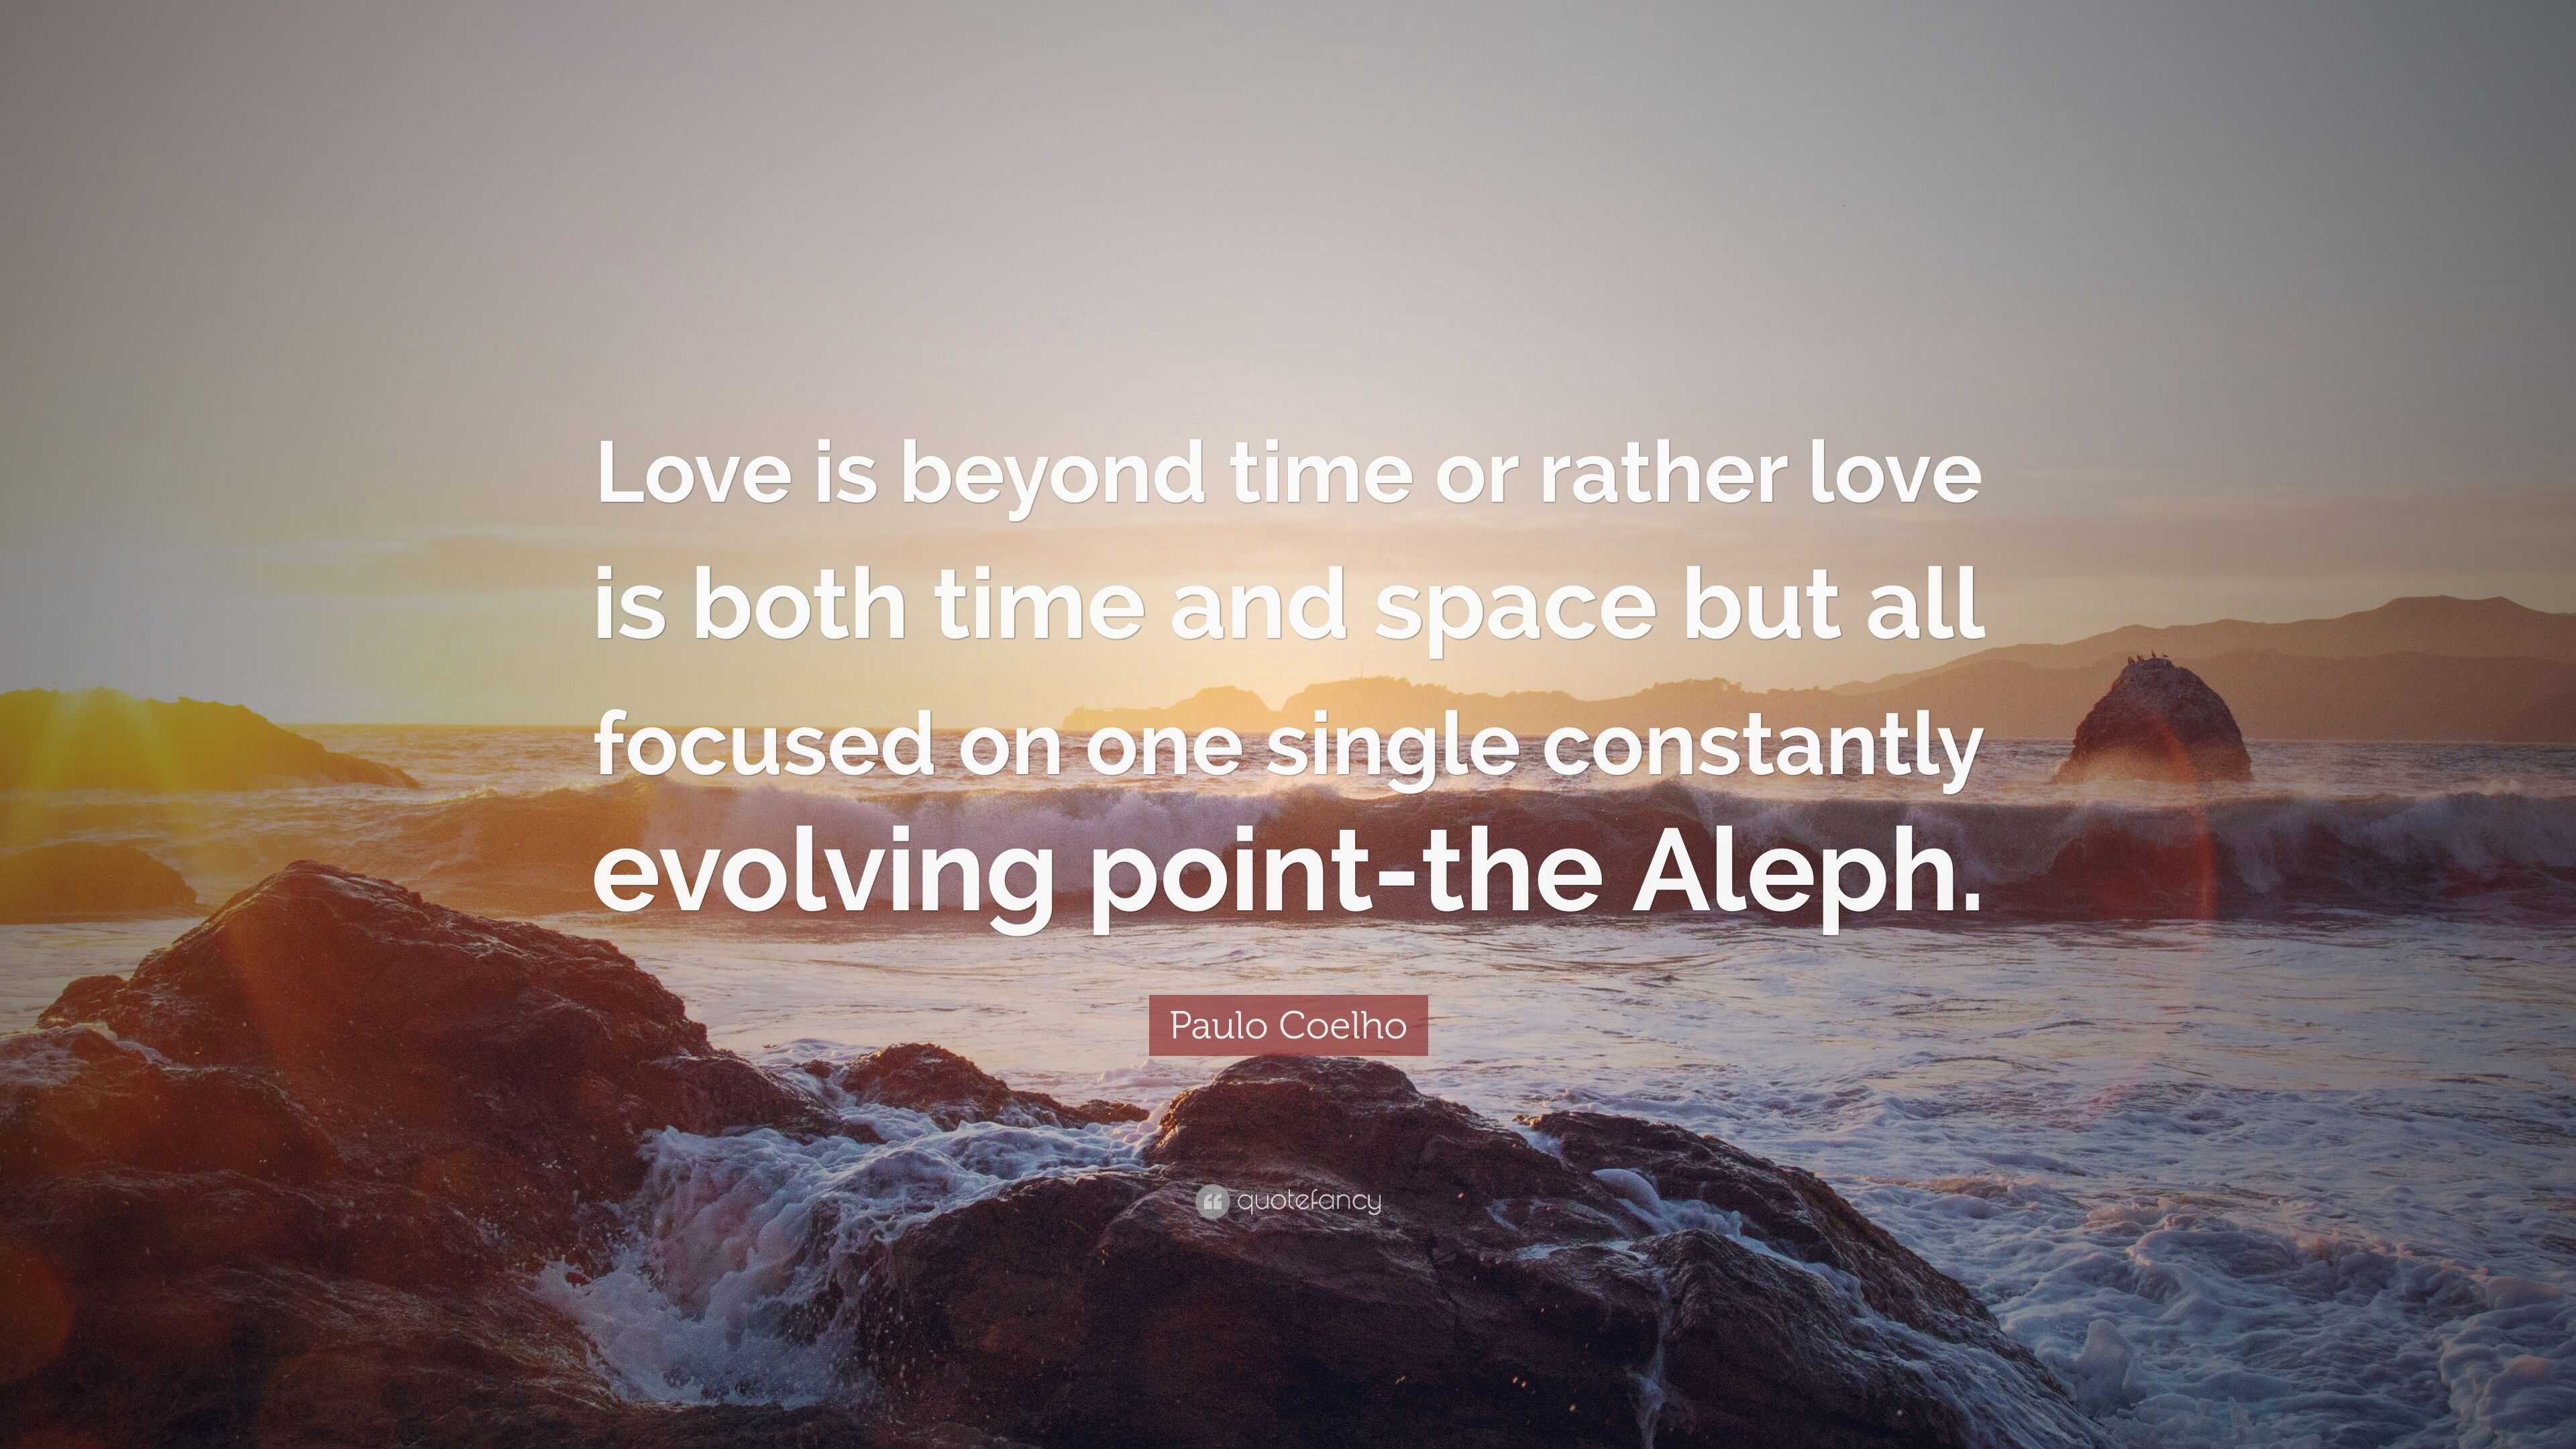 Paulo Coelho Quote Love Is Beyond Time Or Rather Love Is Both Time And